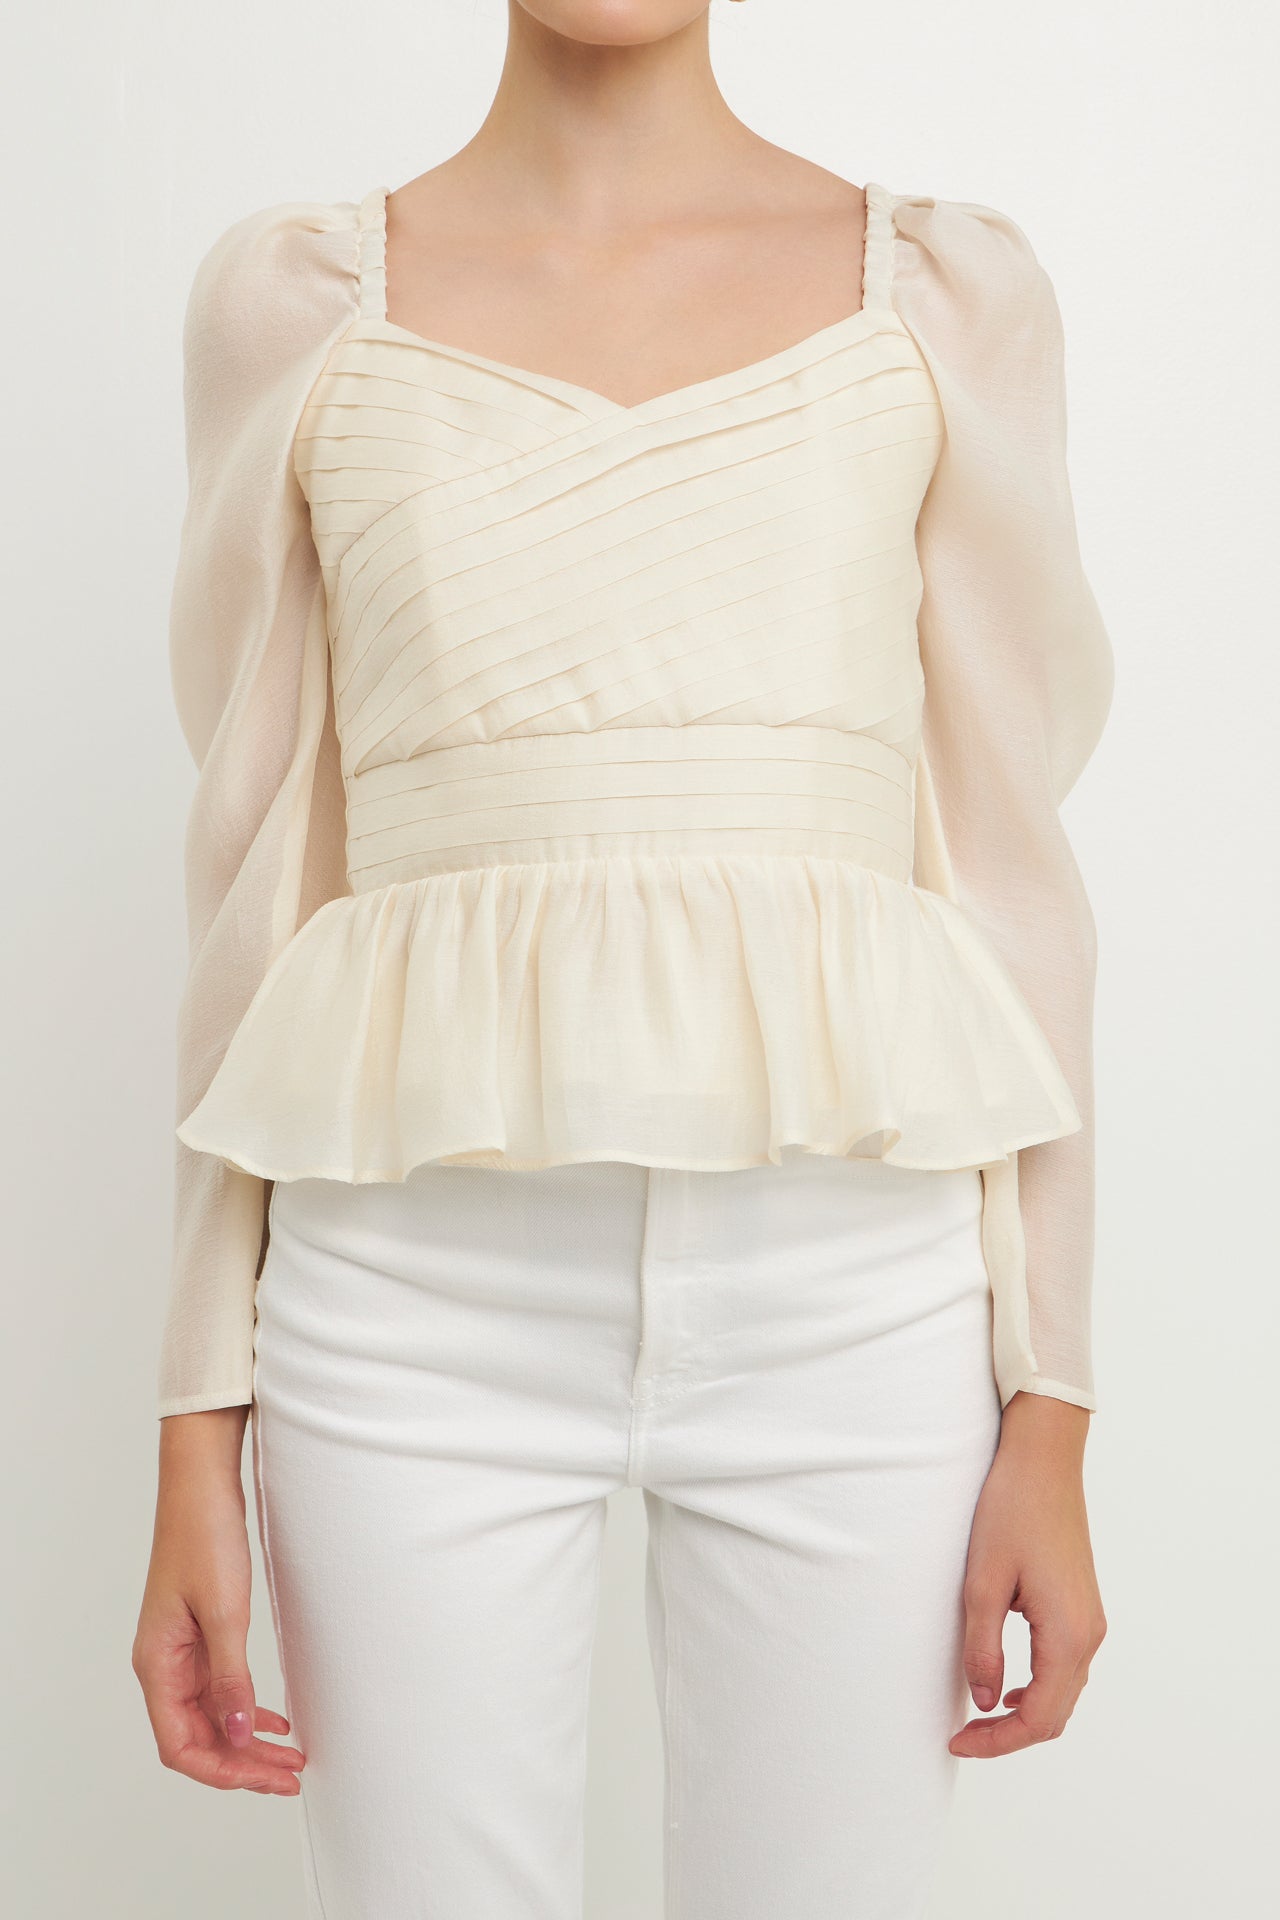 ENDLESS ROSE - Long-Sleeve Peplum Top - TOPS available at Objectrare